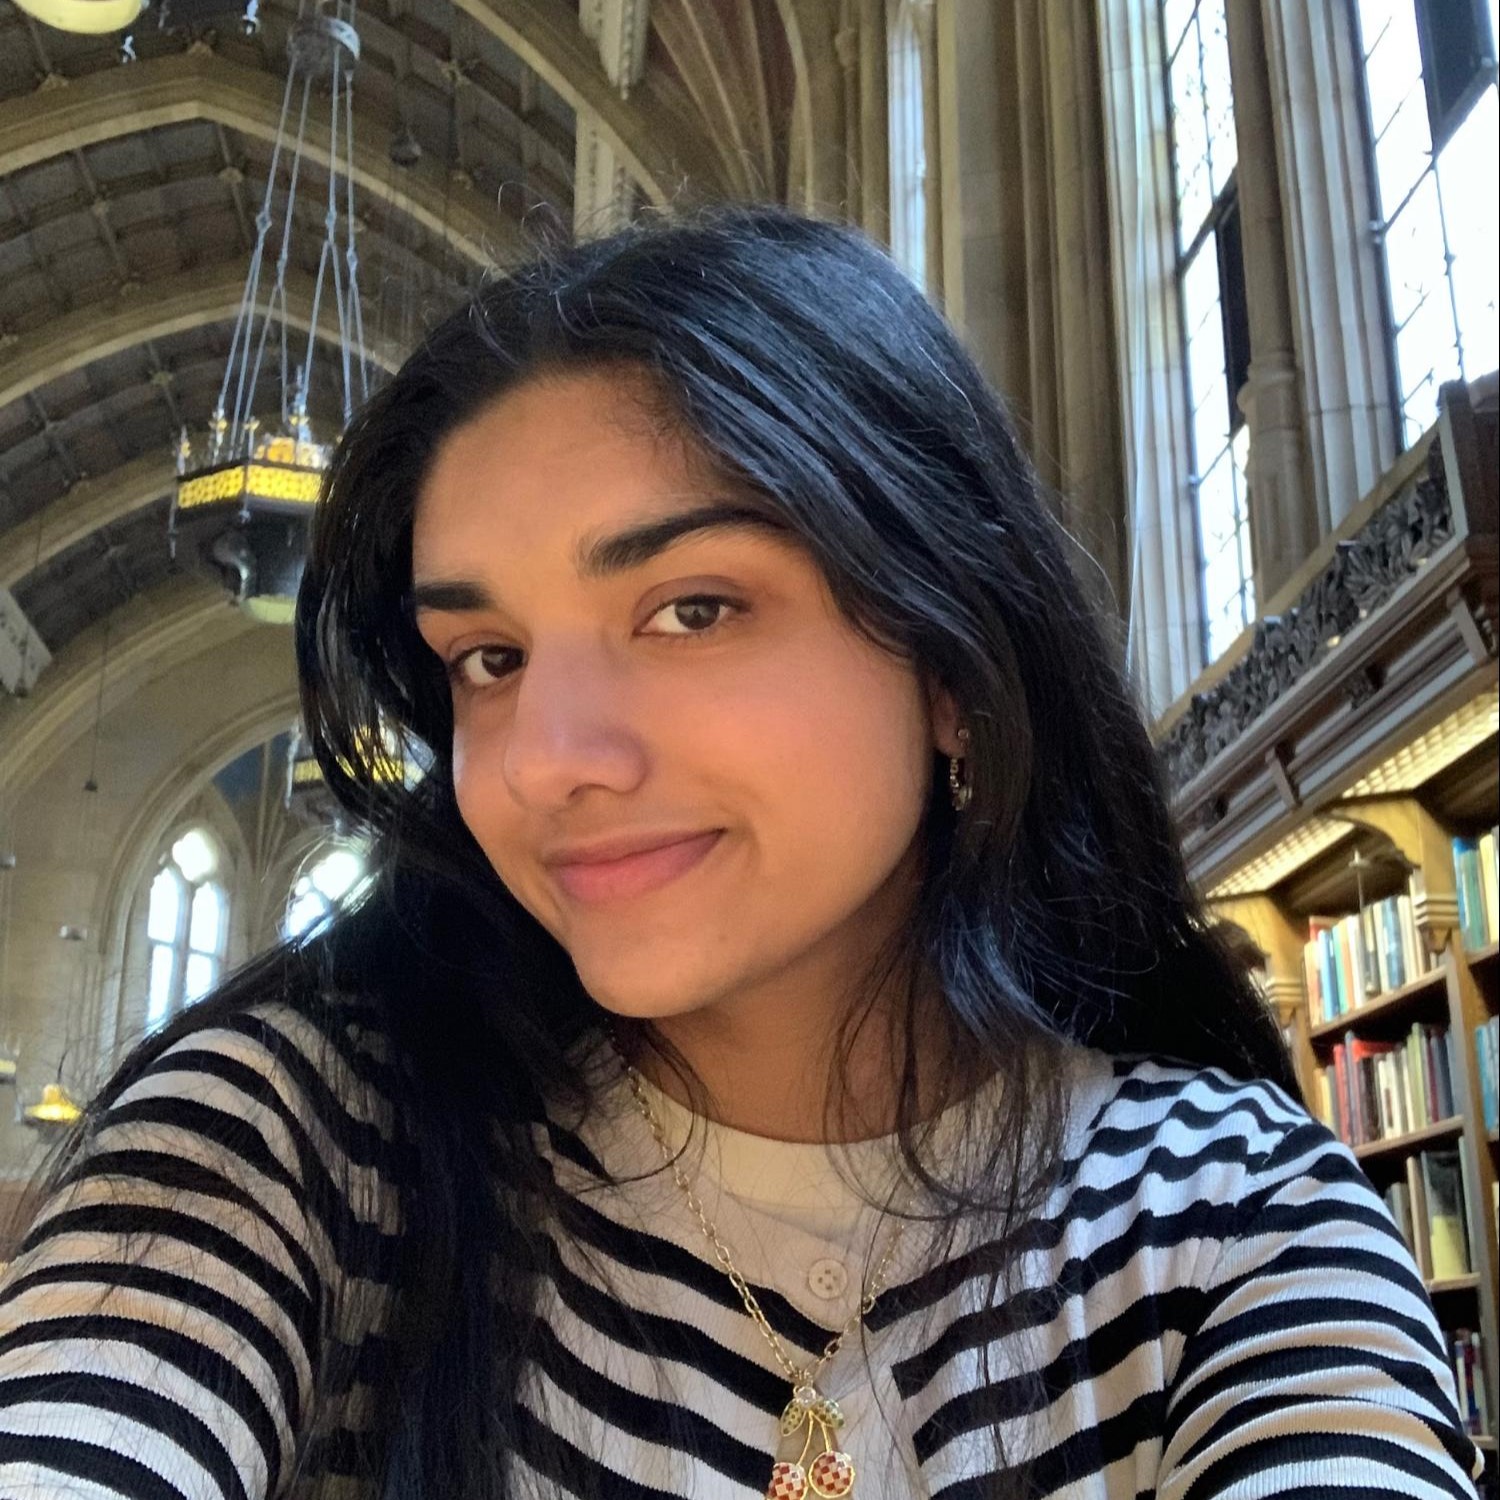 Image of a young Indian-American girl in a striped sweater studying in Suzzallo library.